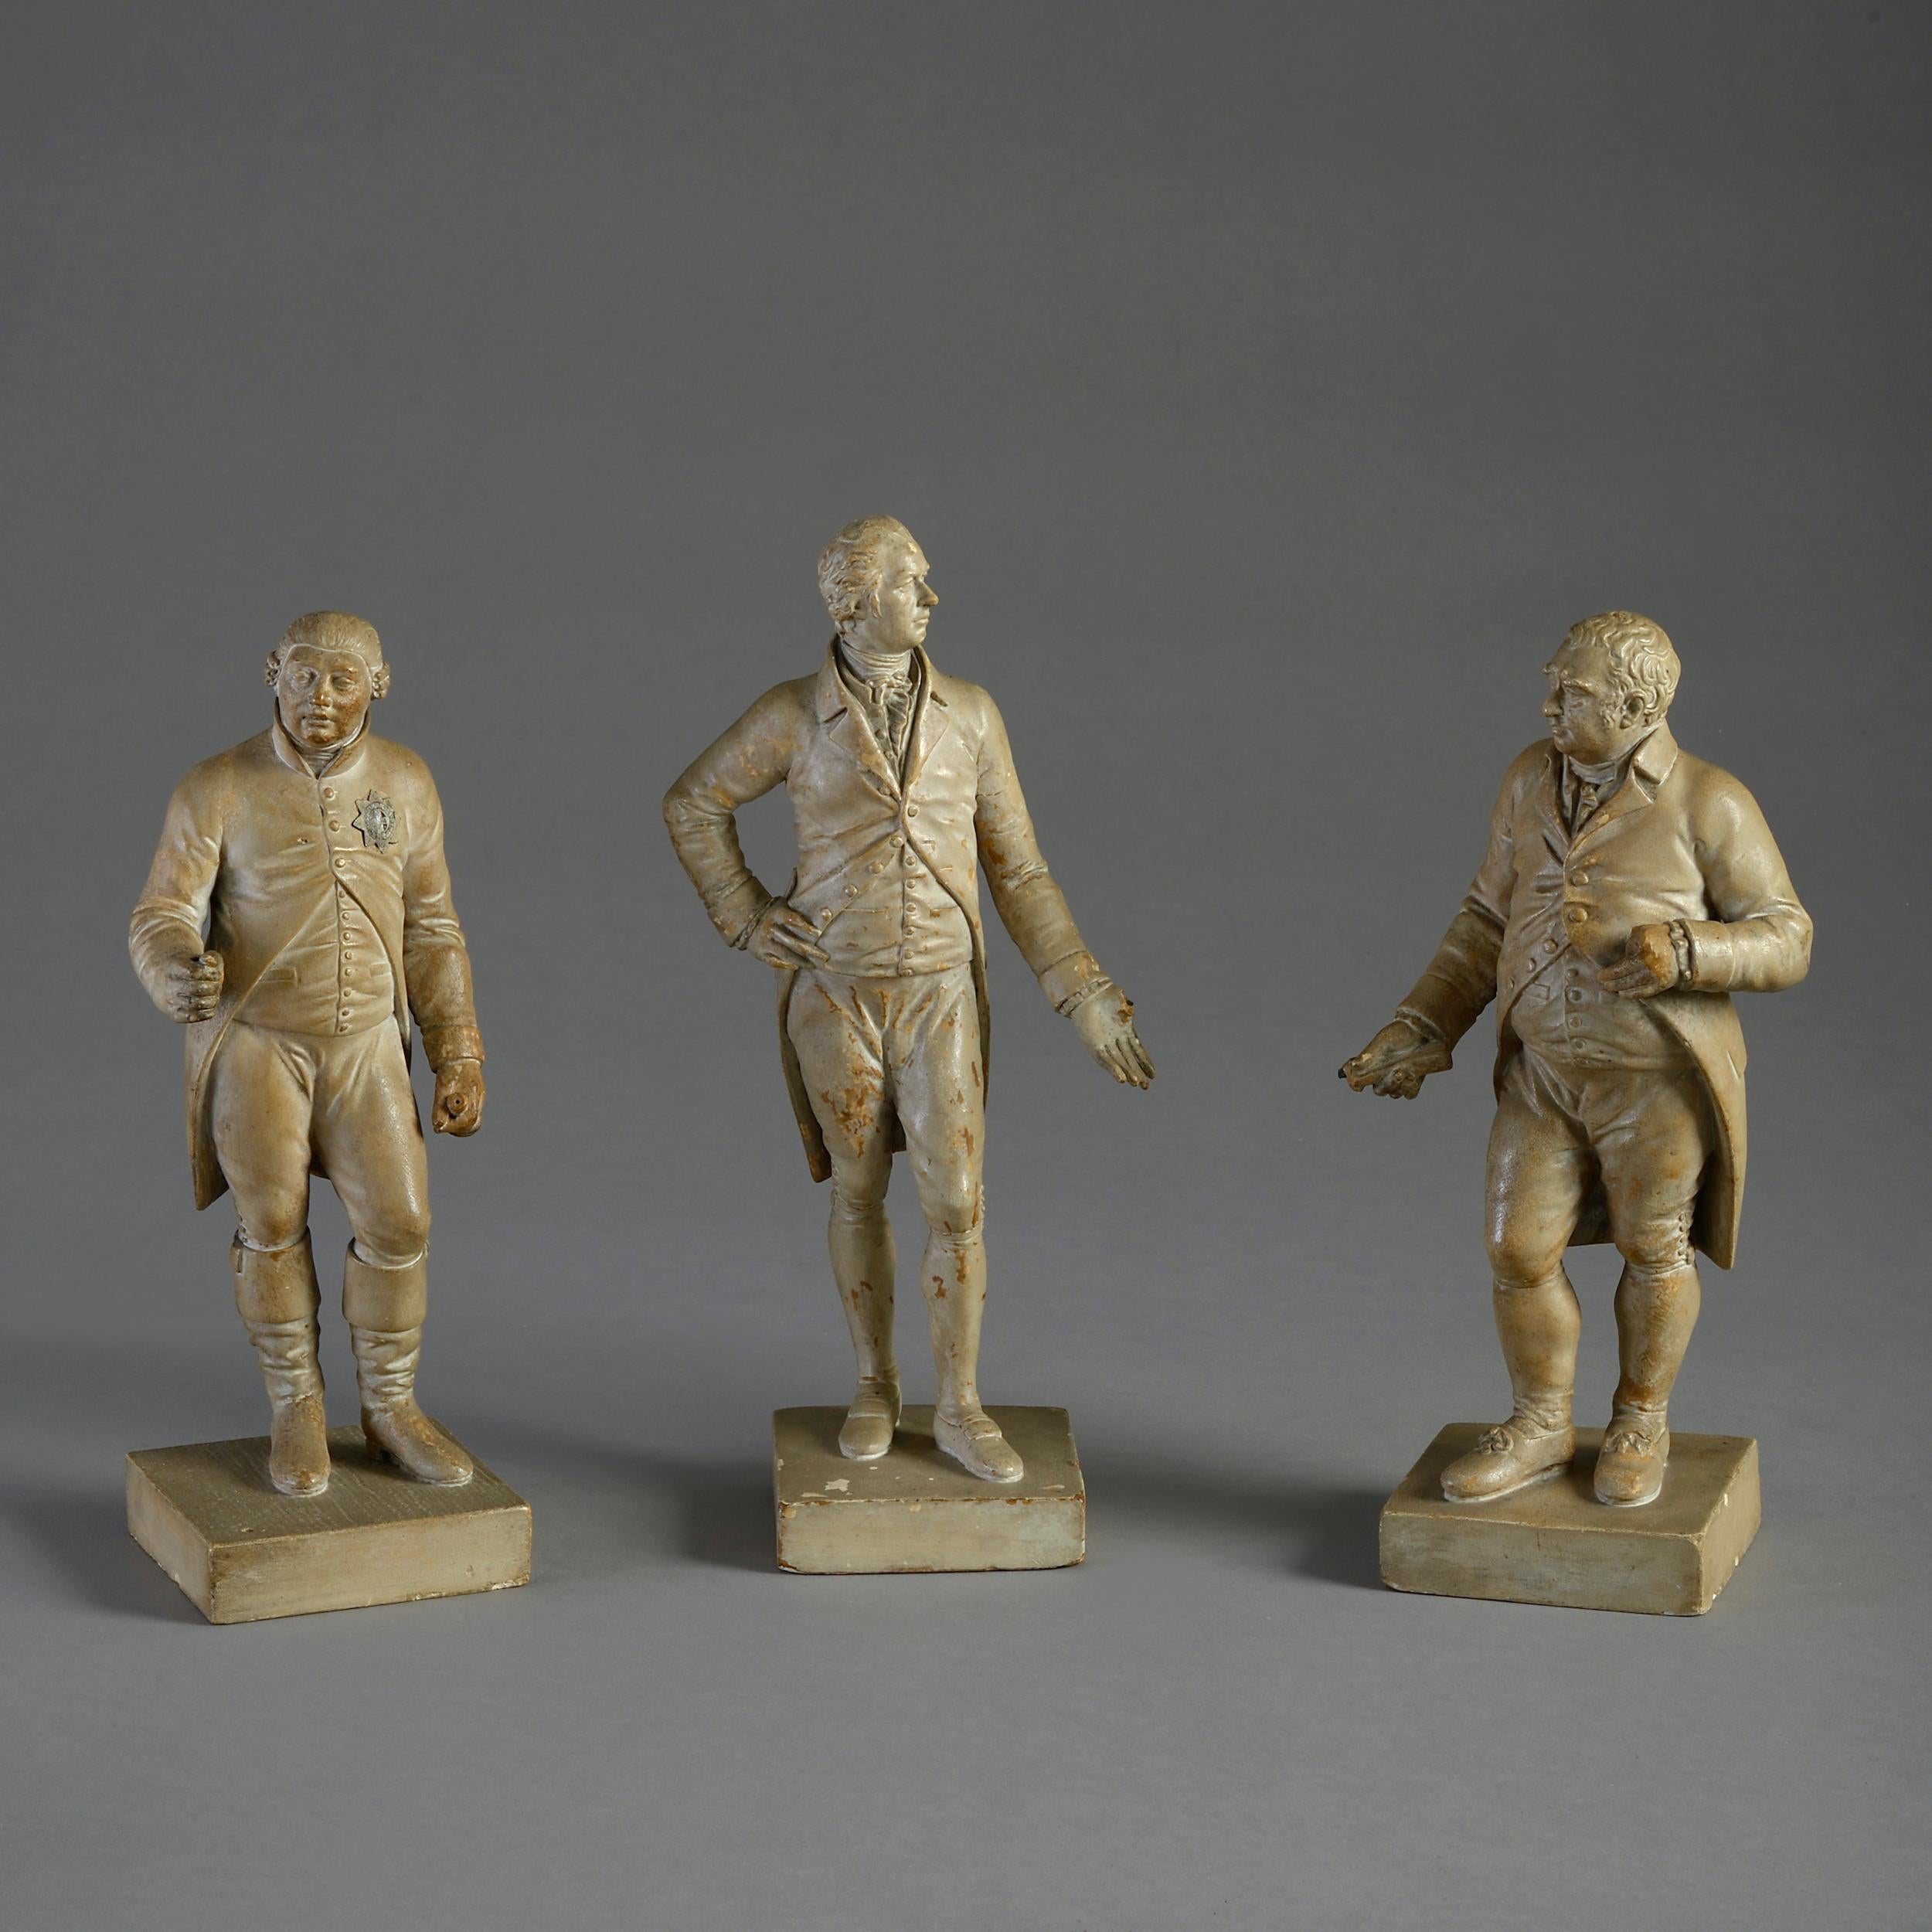 A rare set of three Regency plaster figures of George III, Charles James fox, and Pitt the younger.

Each with their original stone-coloured decoration and inscribed Published 1820 By F. Hardenberg Mount St. Gros Sq London.